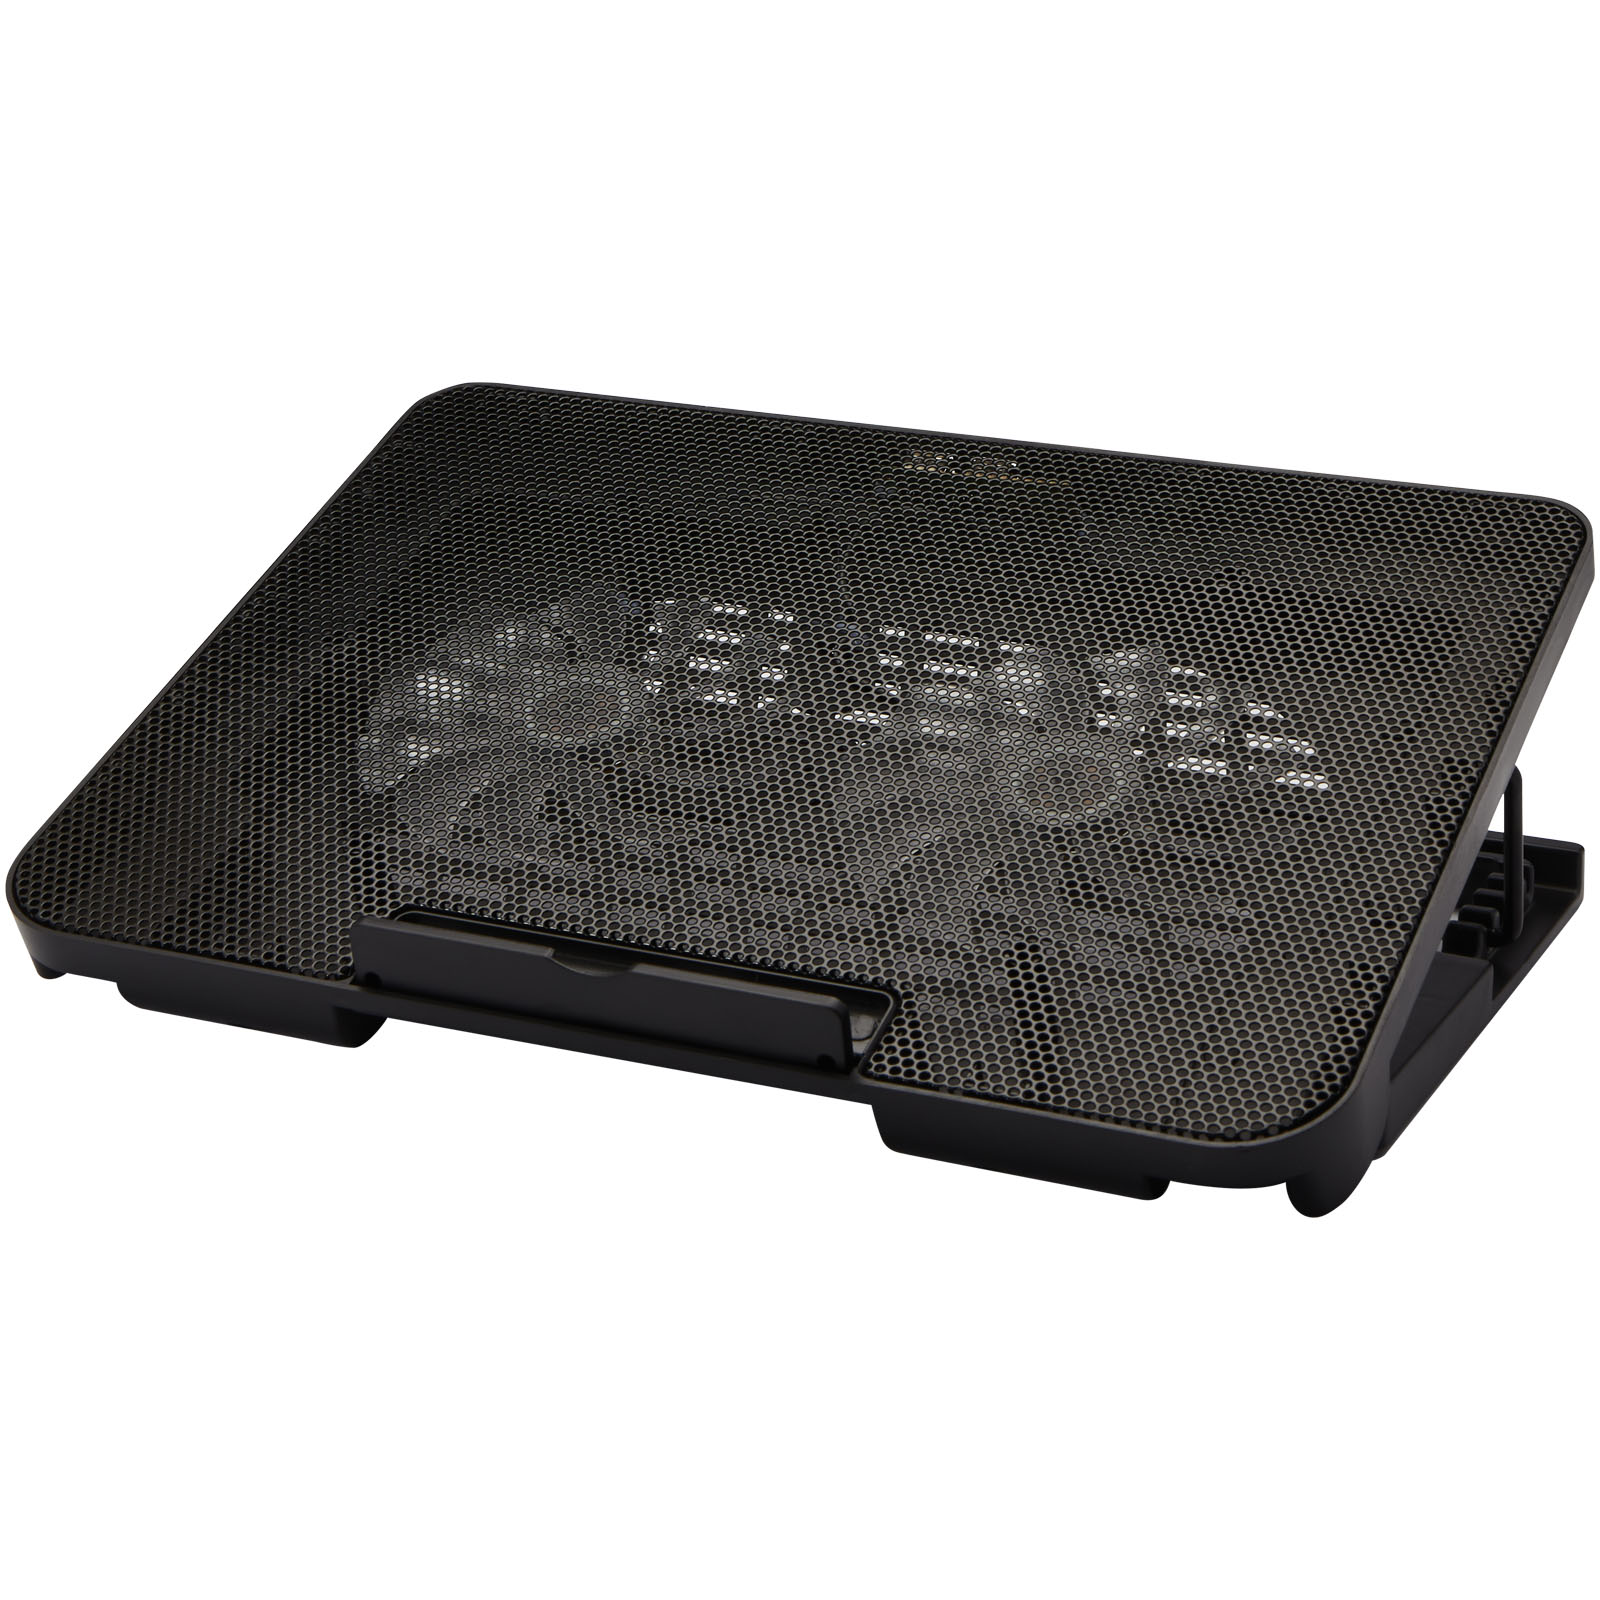 Technology - Gleam gaming laptop cooling stand